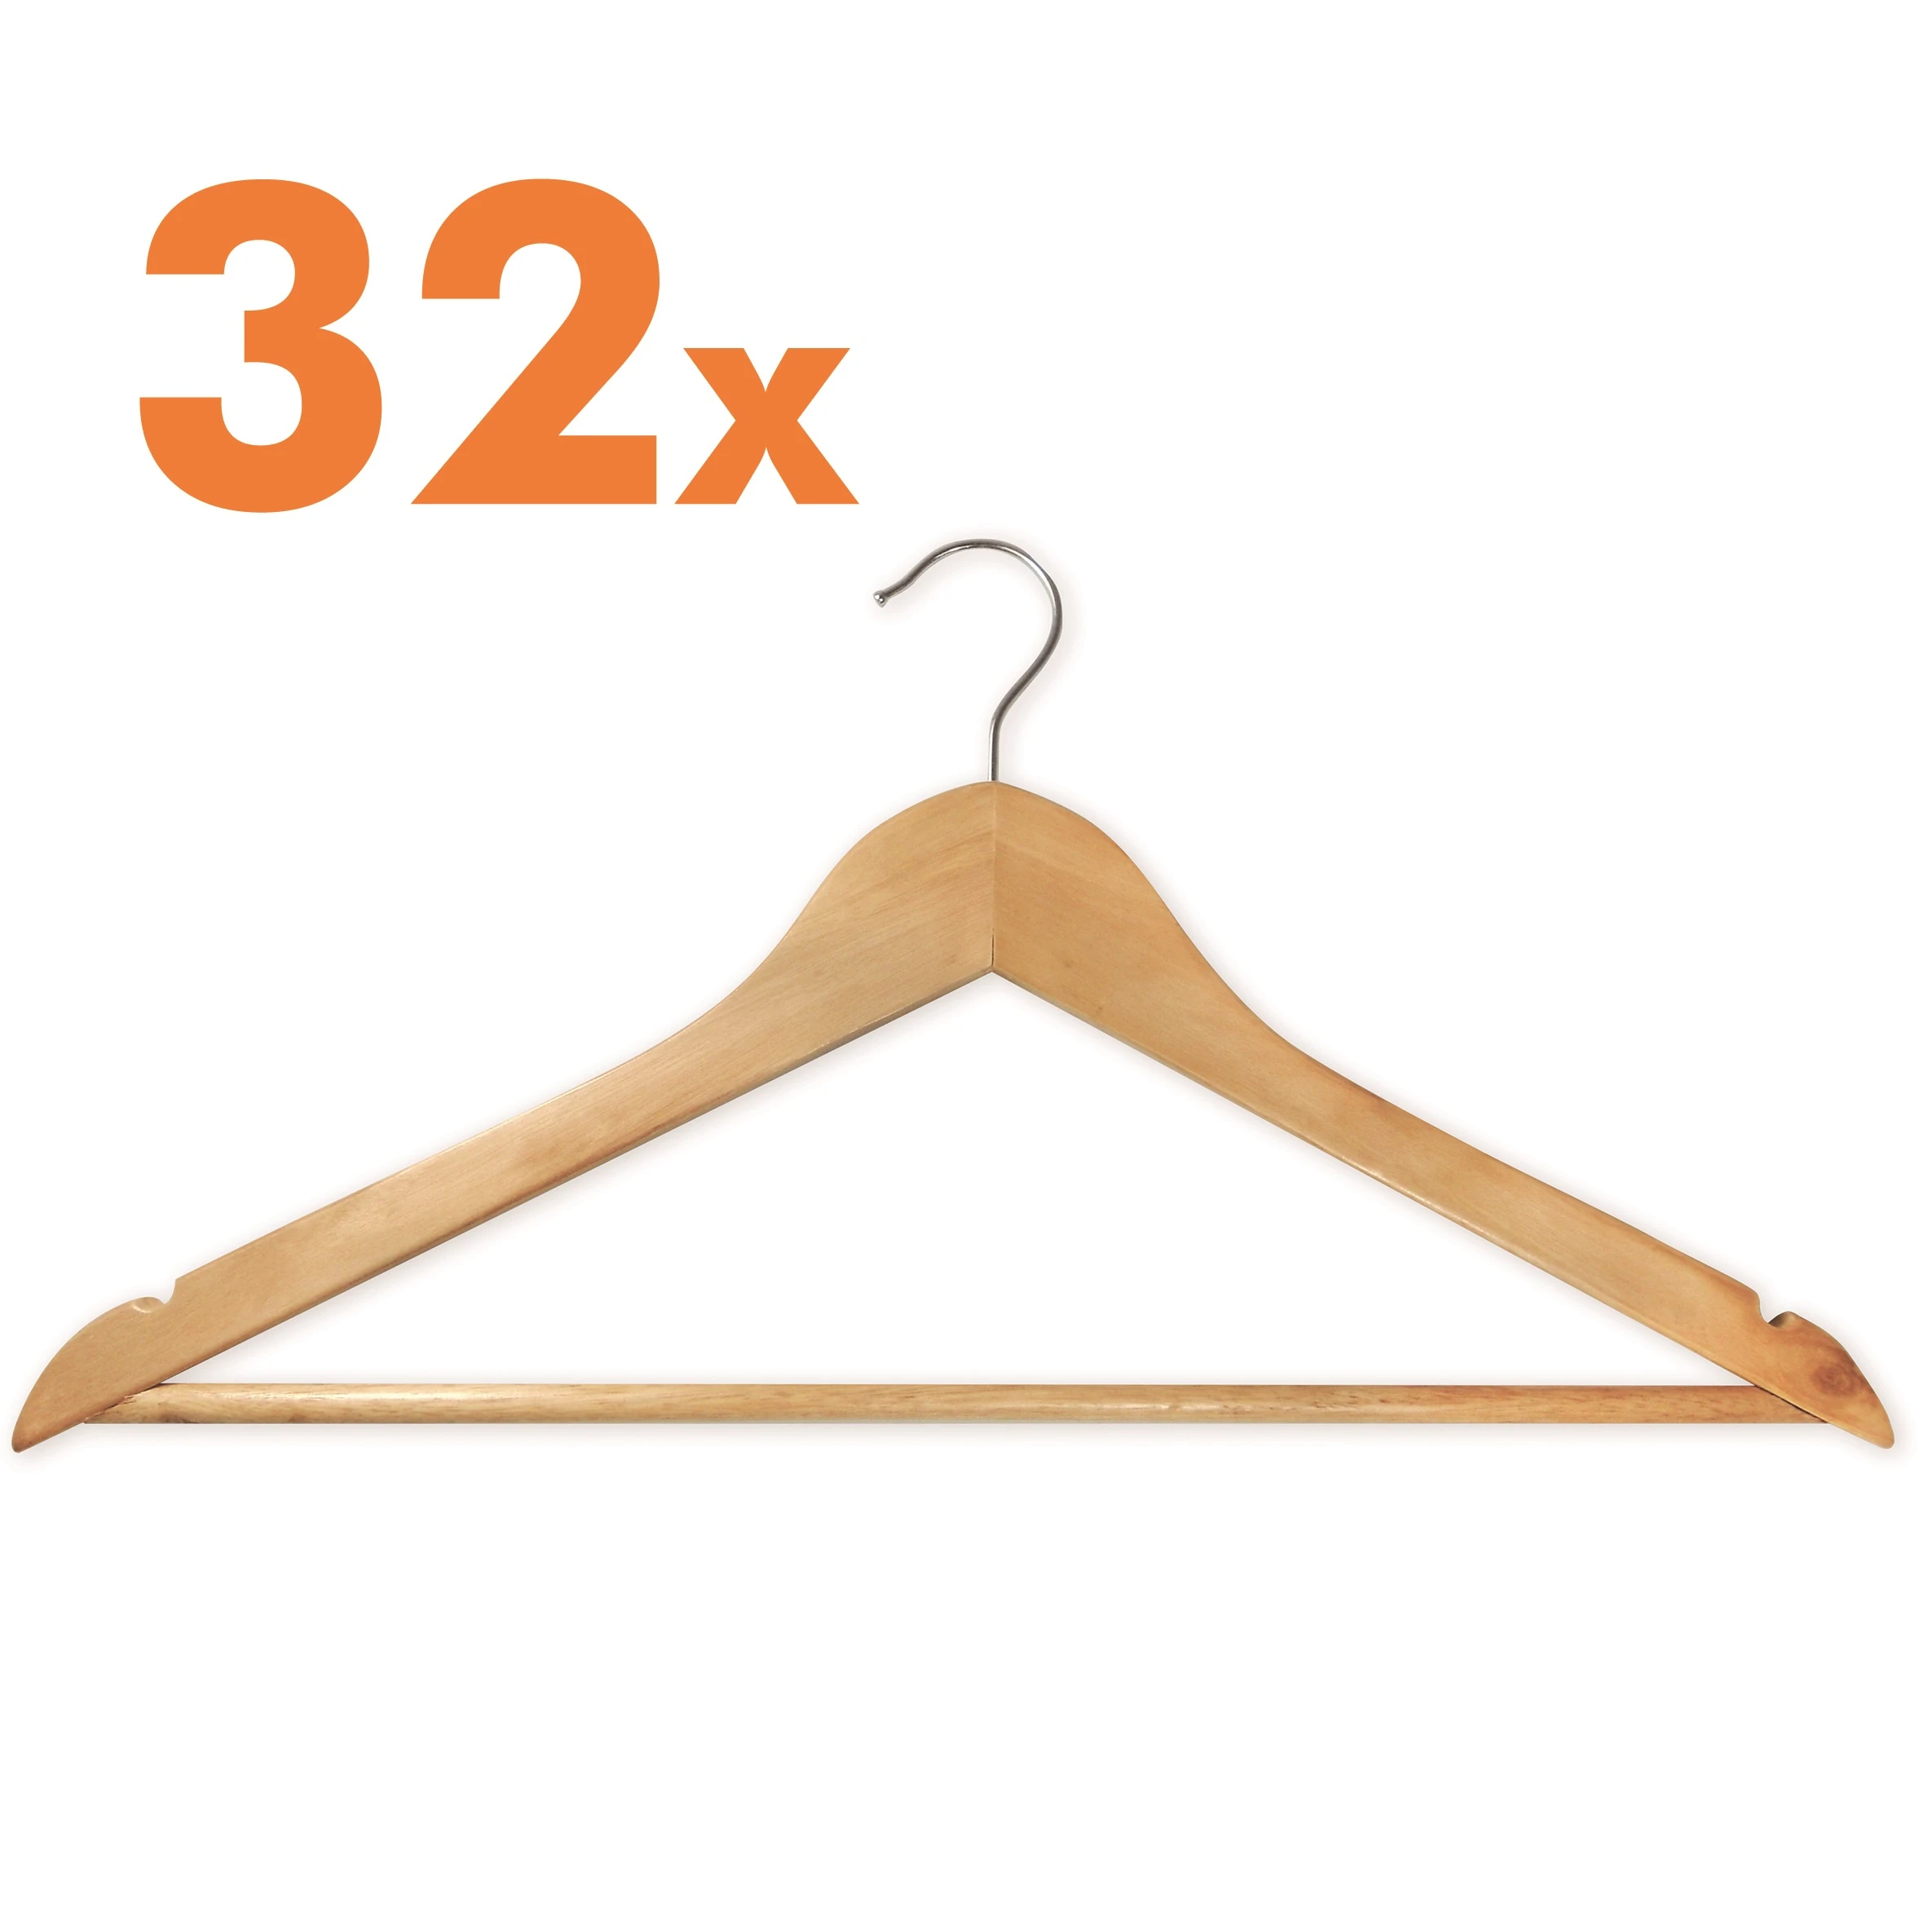 32 WOODEN HANGERS SET FOR CLOTHES. SOLID PEG FOR SHIRT. NON-SLIP HOOK FOR TROUSERS/JEANS